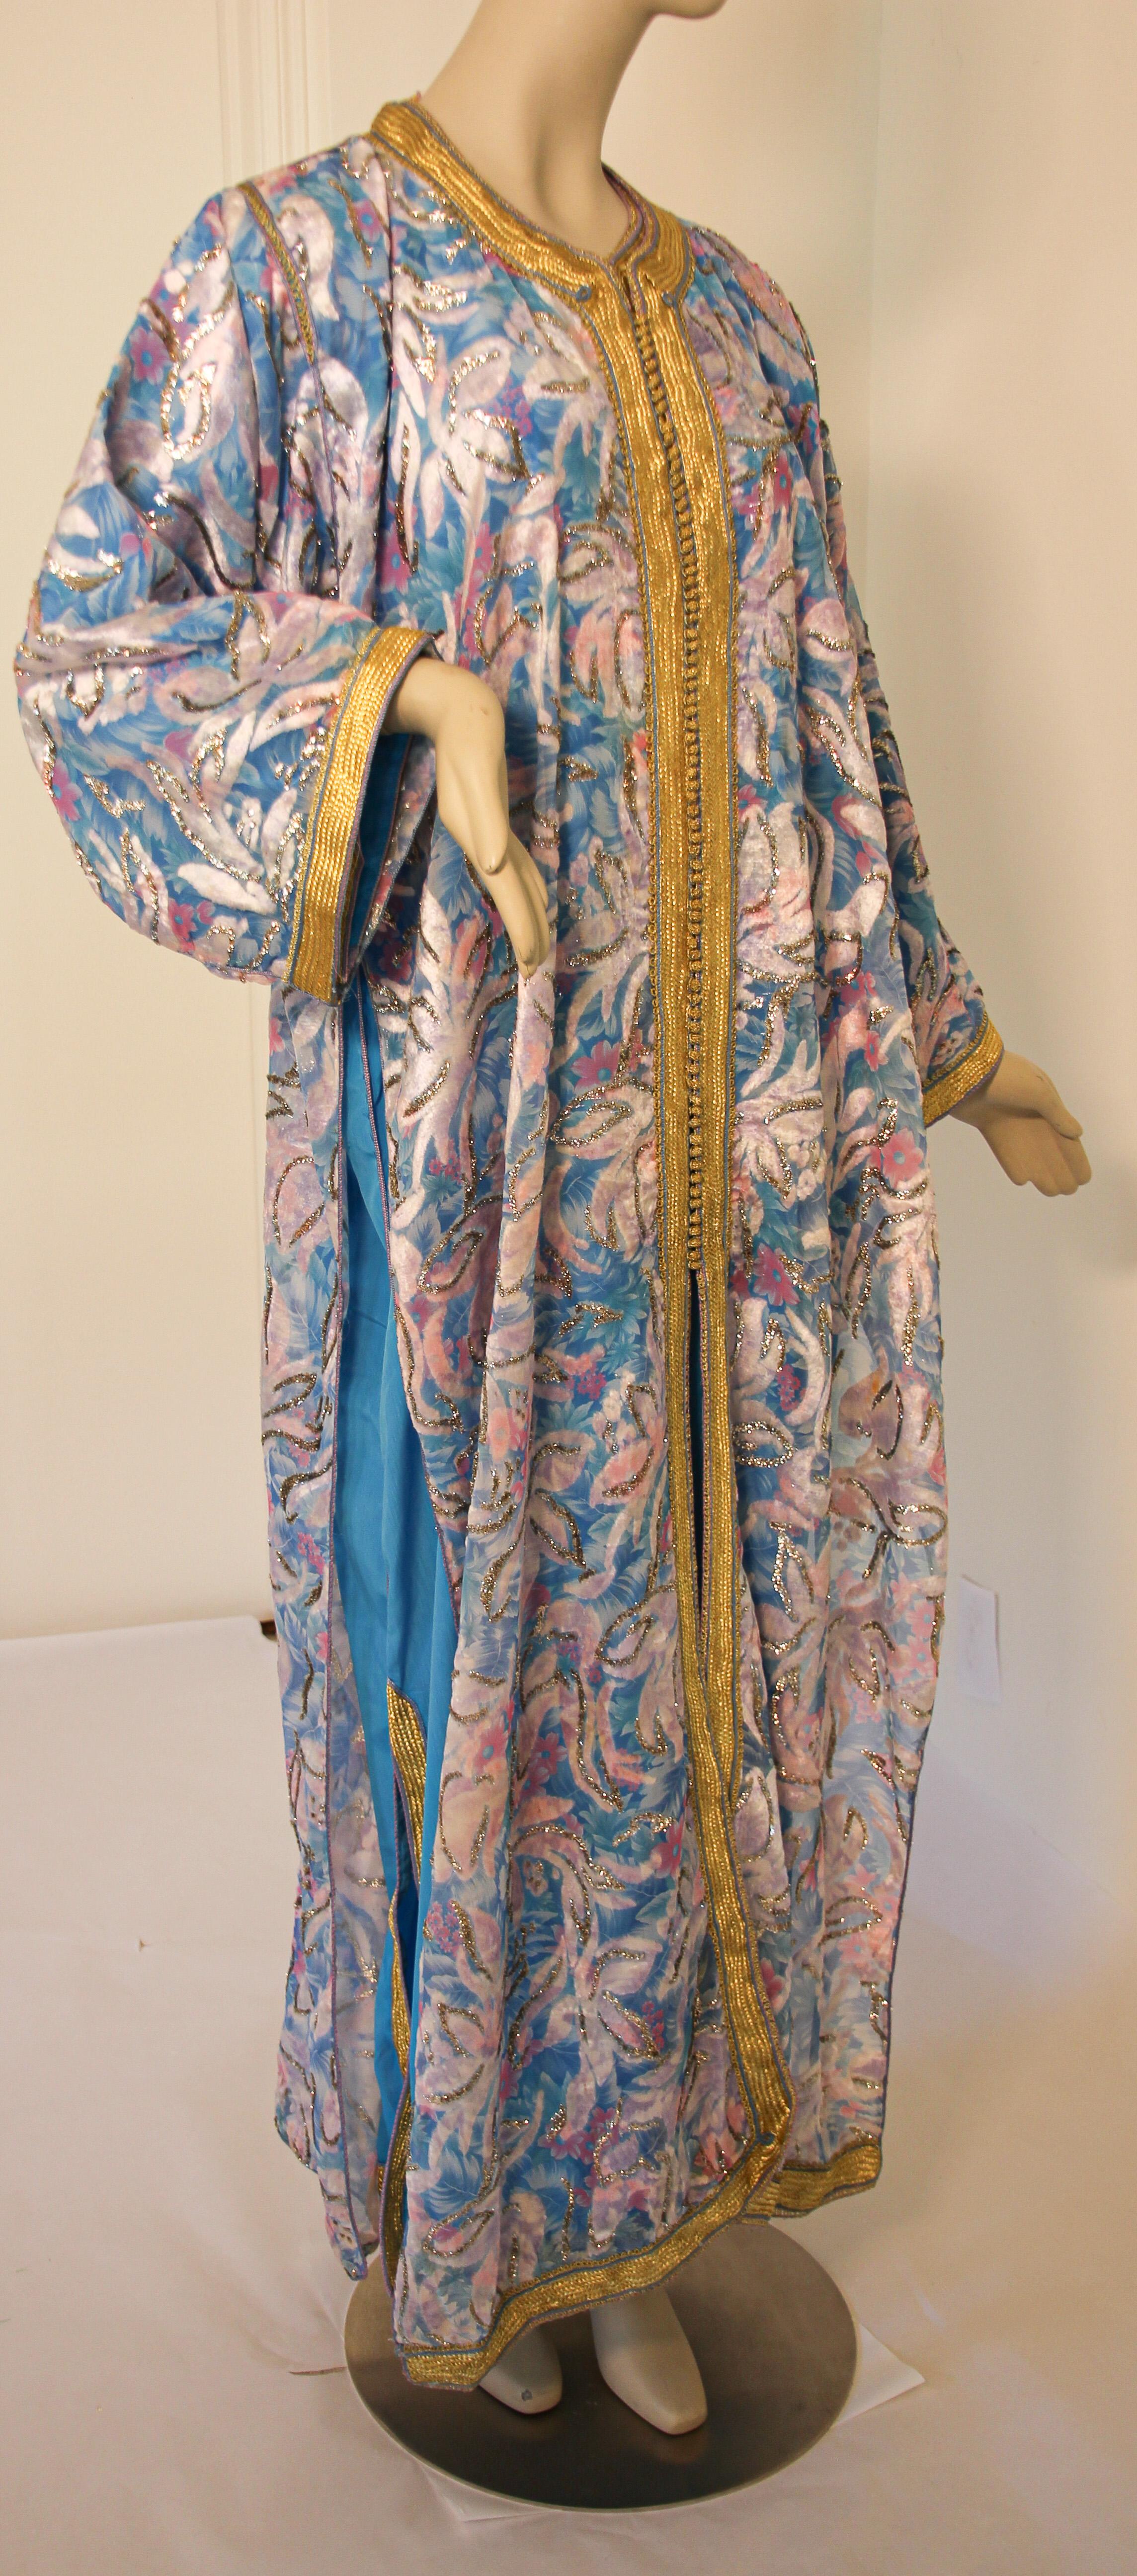 Hand-Crafted Moroccan Kaftan in Turquoise and Gold Floral Brocade Metallic Lame For Sale